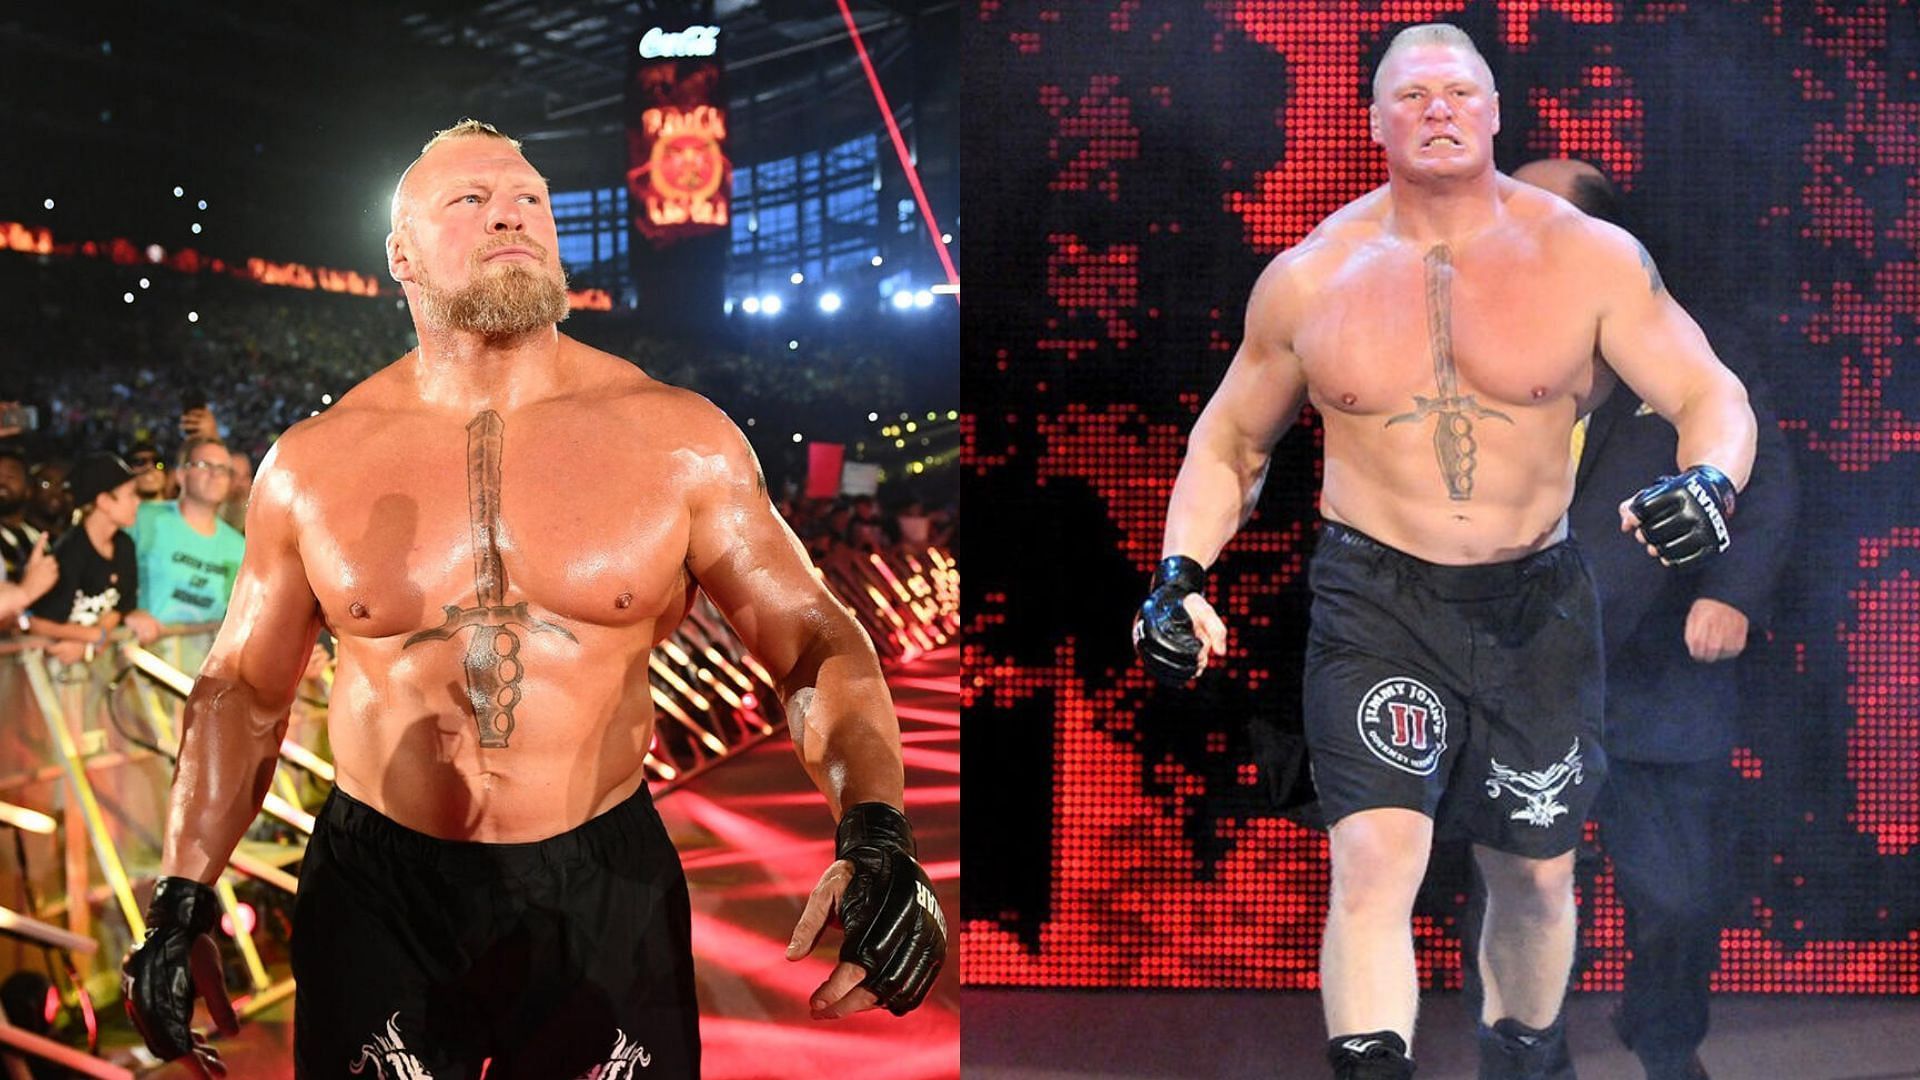 Brock Lesnar is currently absent from WWE